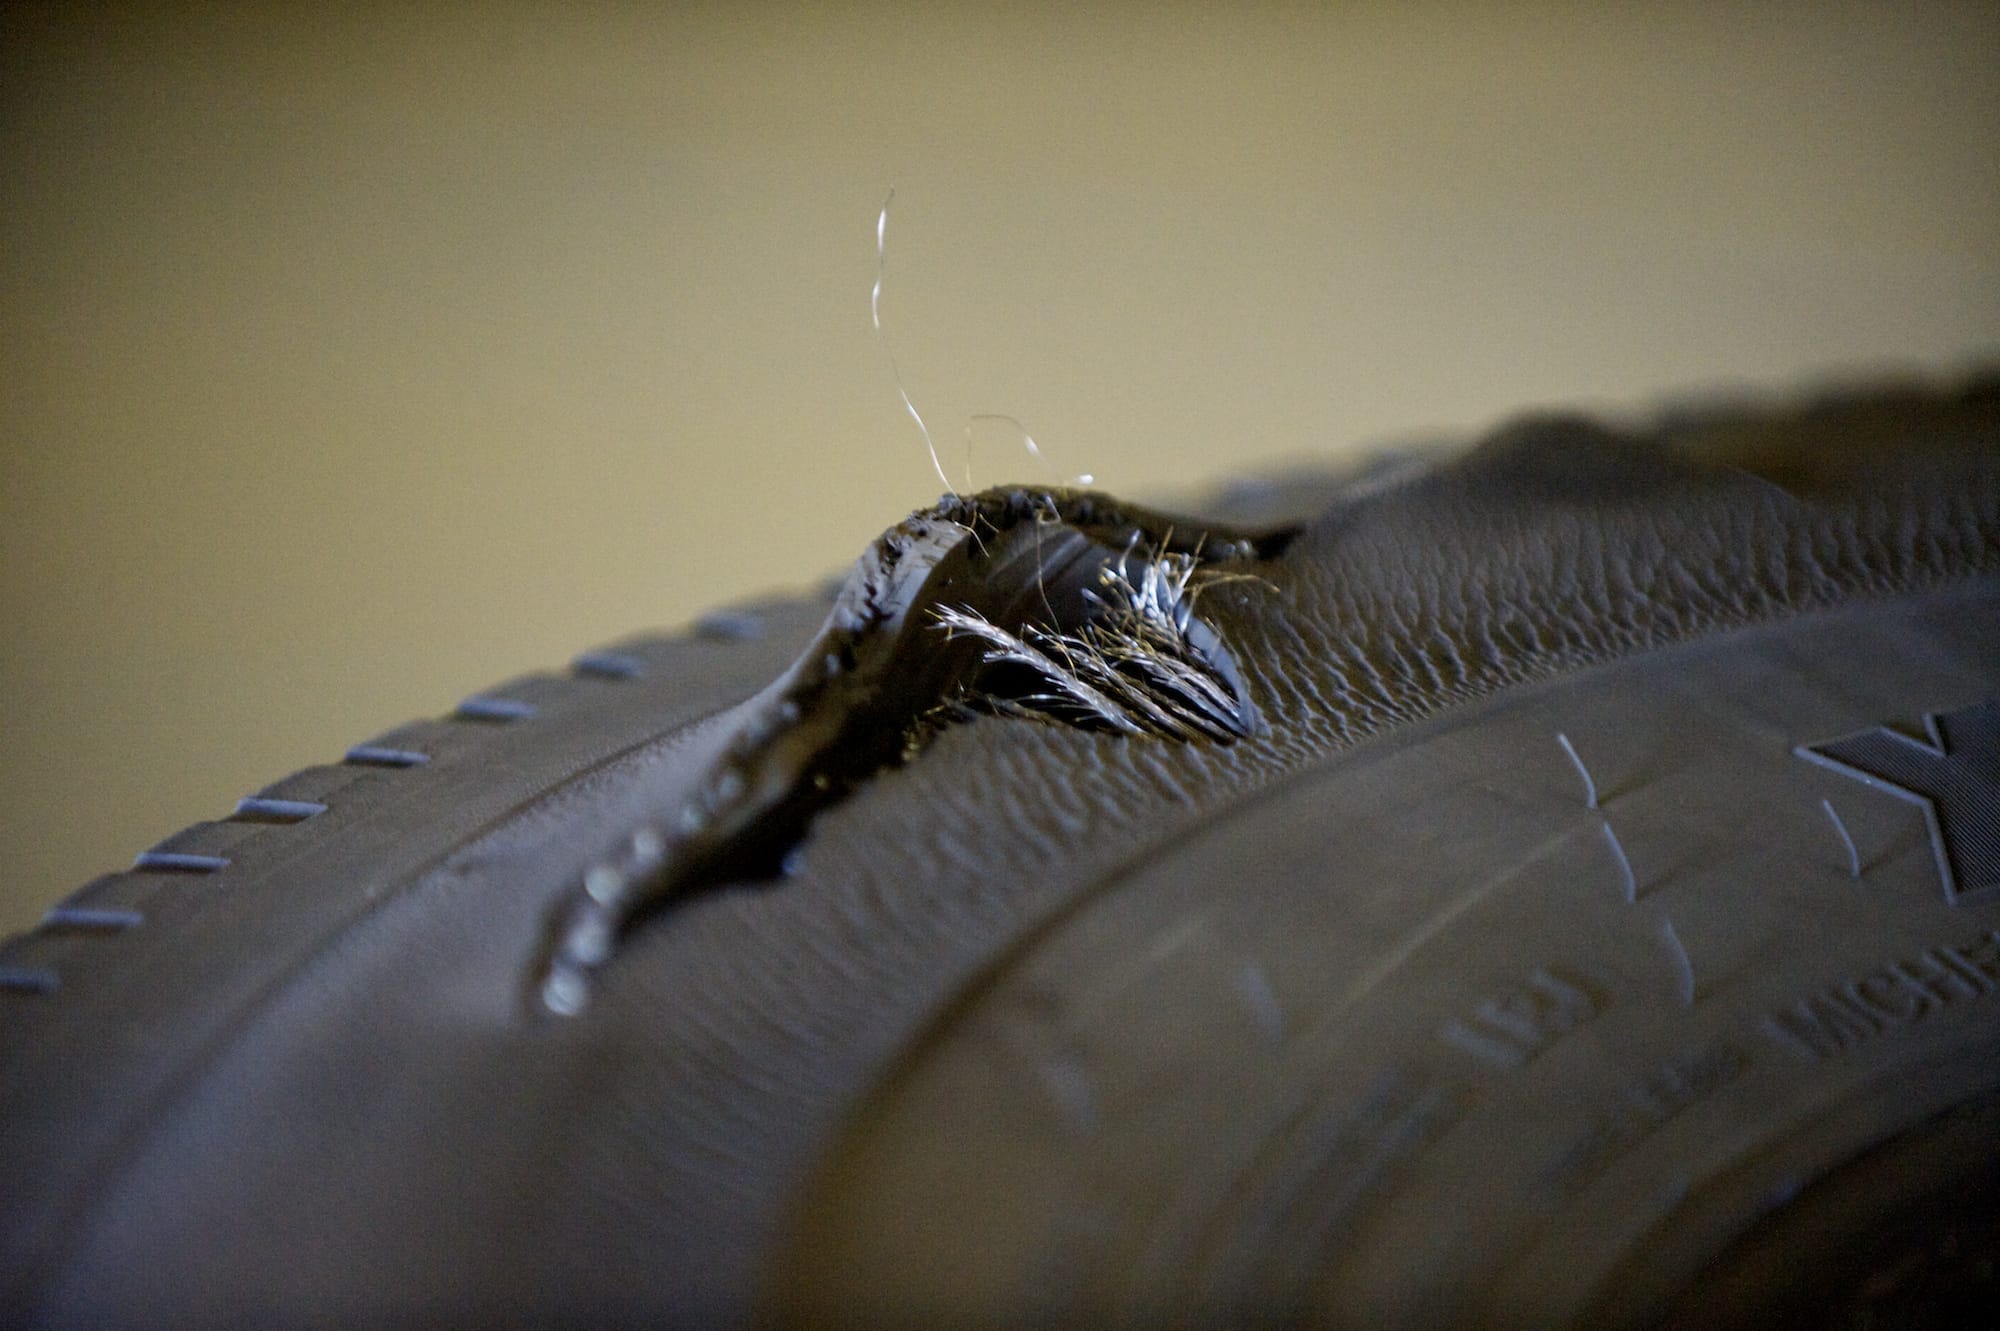 C-Tran buses experienced 43 tire blowouts in 2011, more than the previous two years combined.